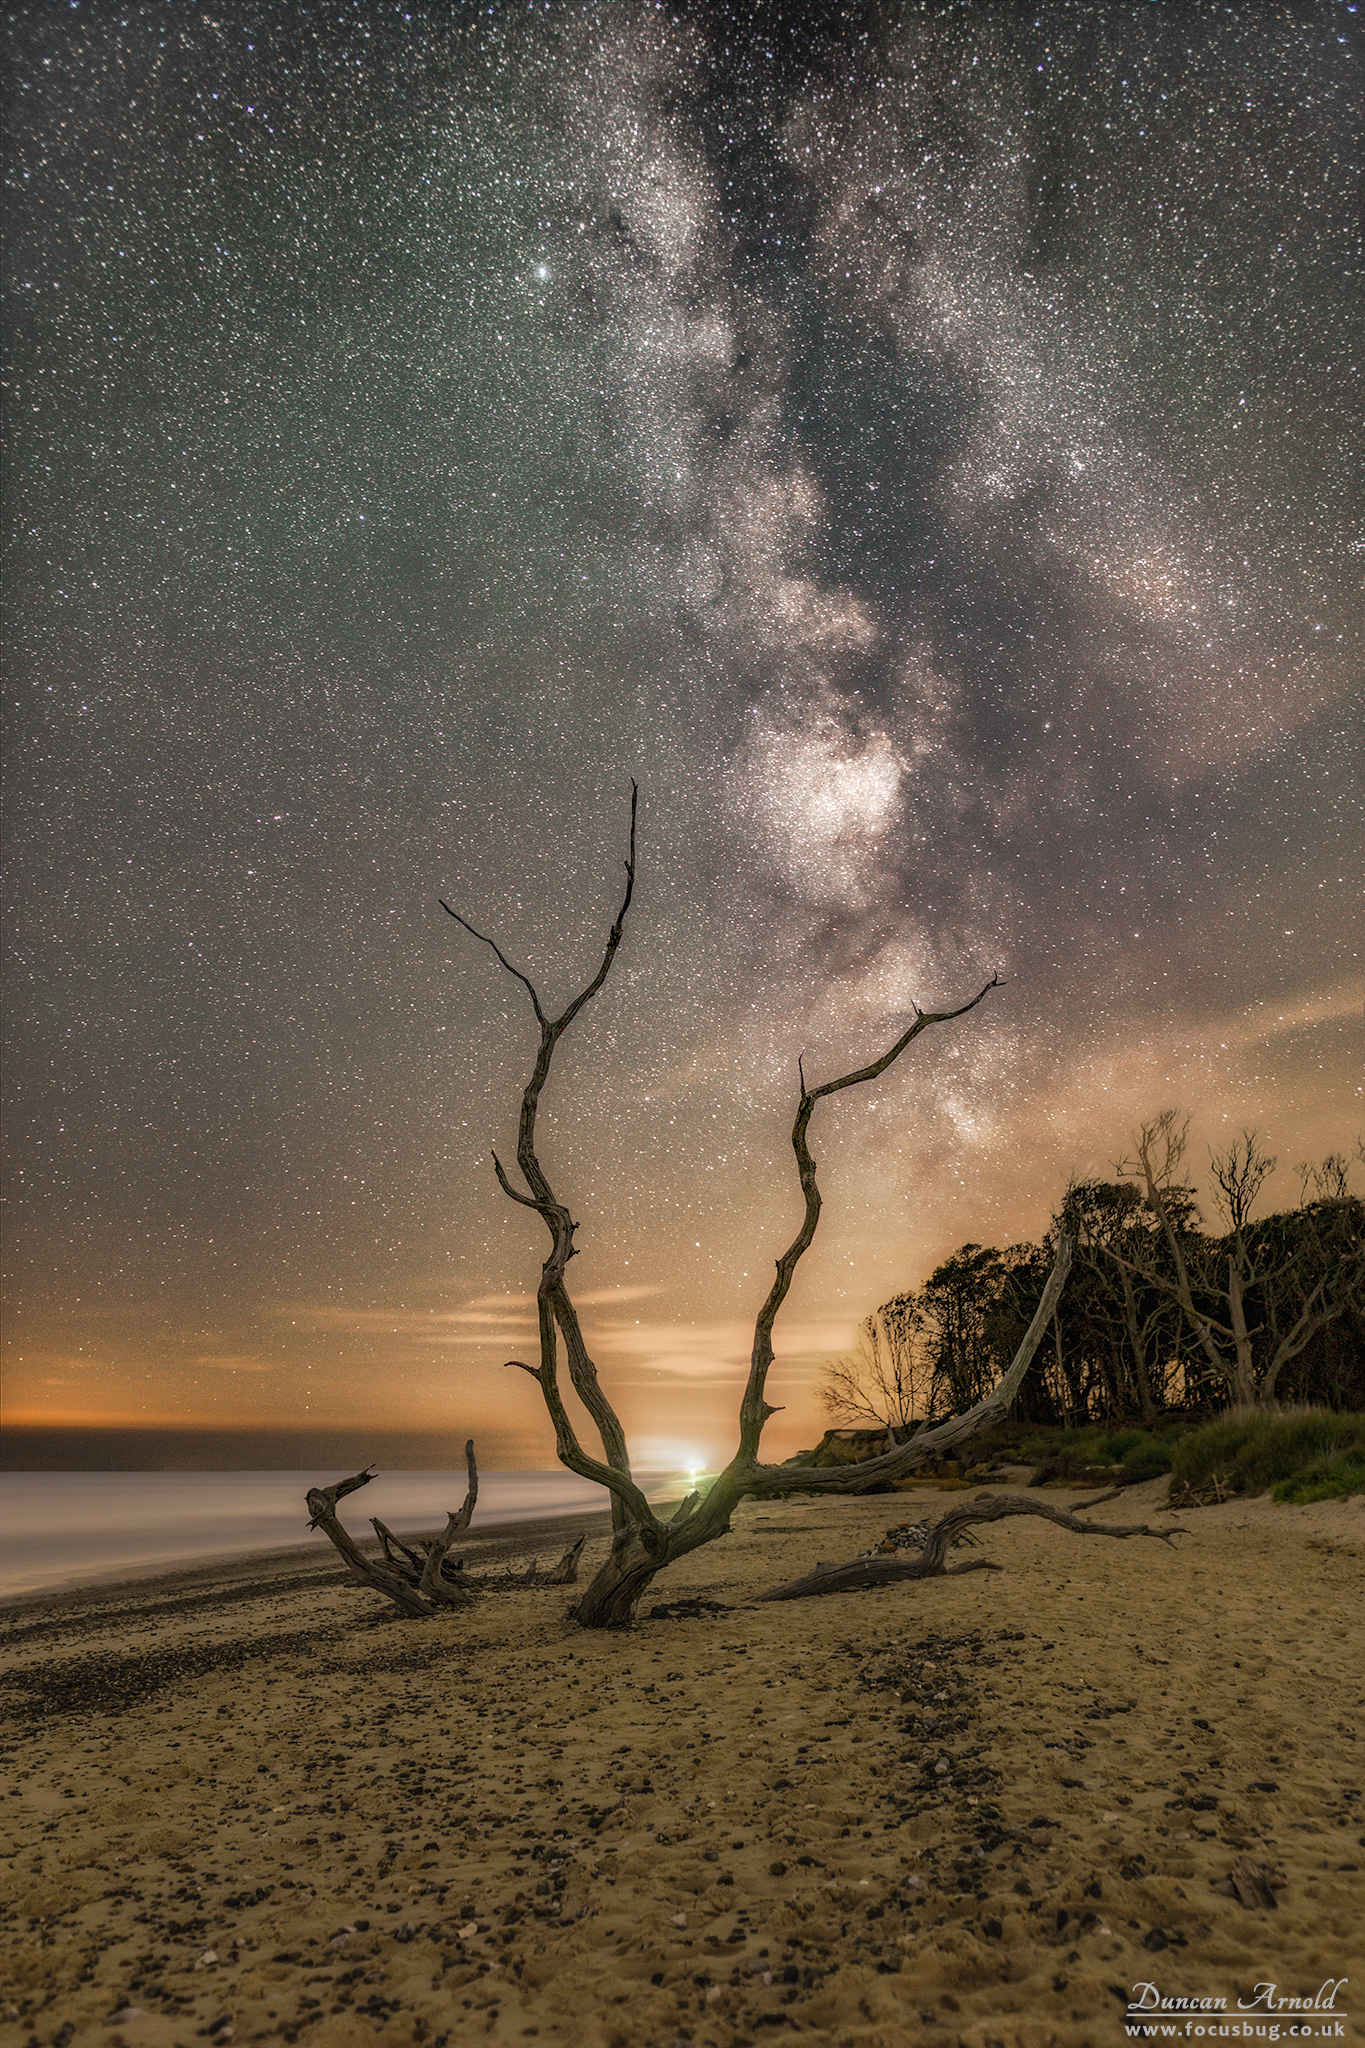 Suffolk Landscape Photography - Covehithe and the Milky Way.